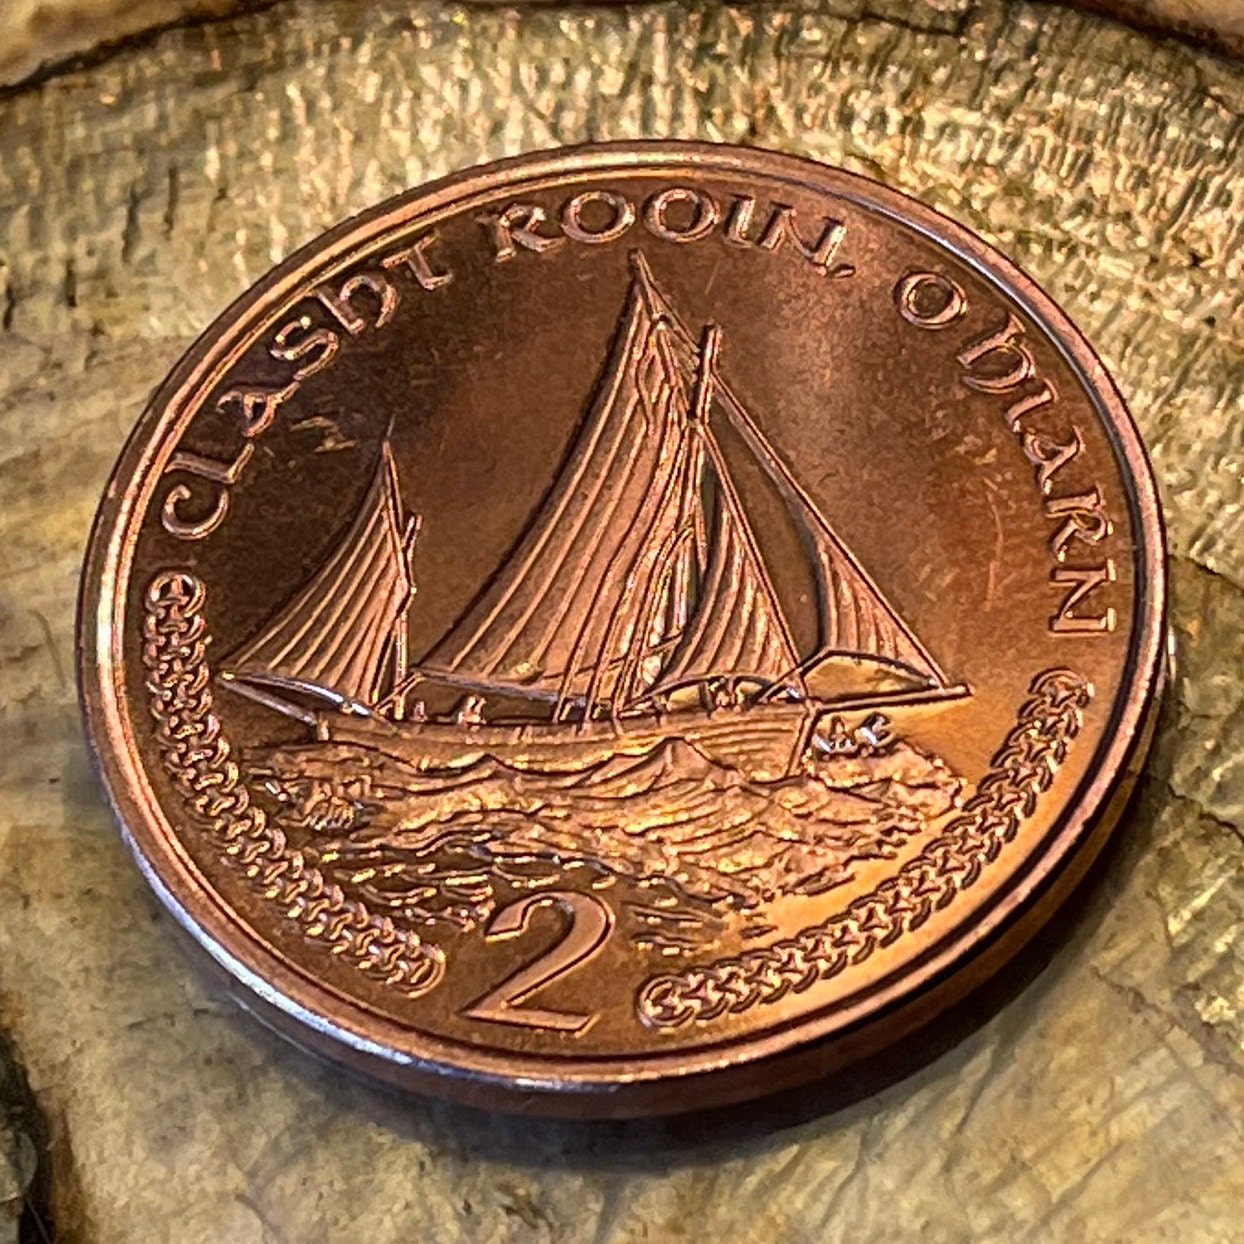 Manx Nobby Lugger Fishing Boat 2 Pence Isle of Man Authentic Coin Money for Jewelry and Craft Making